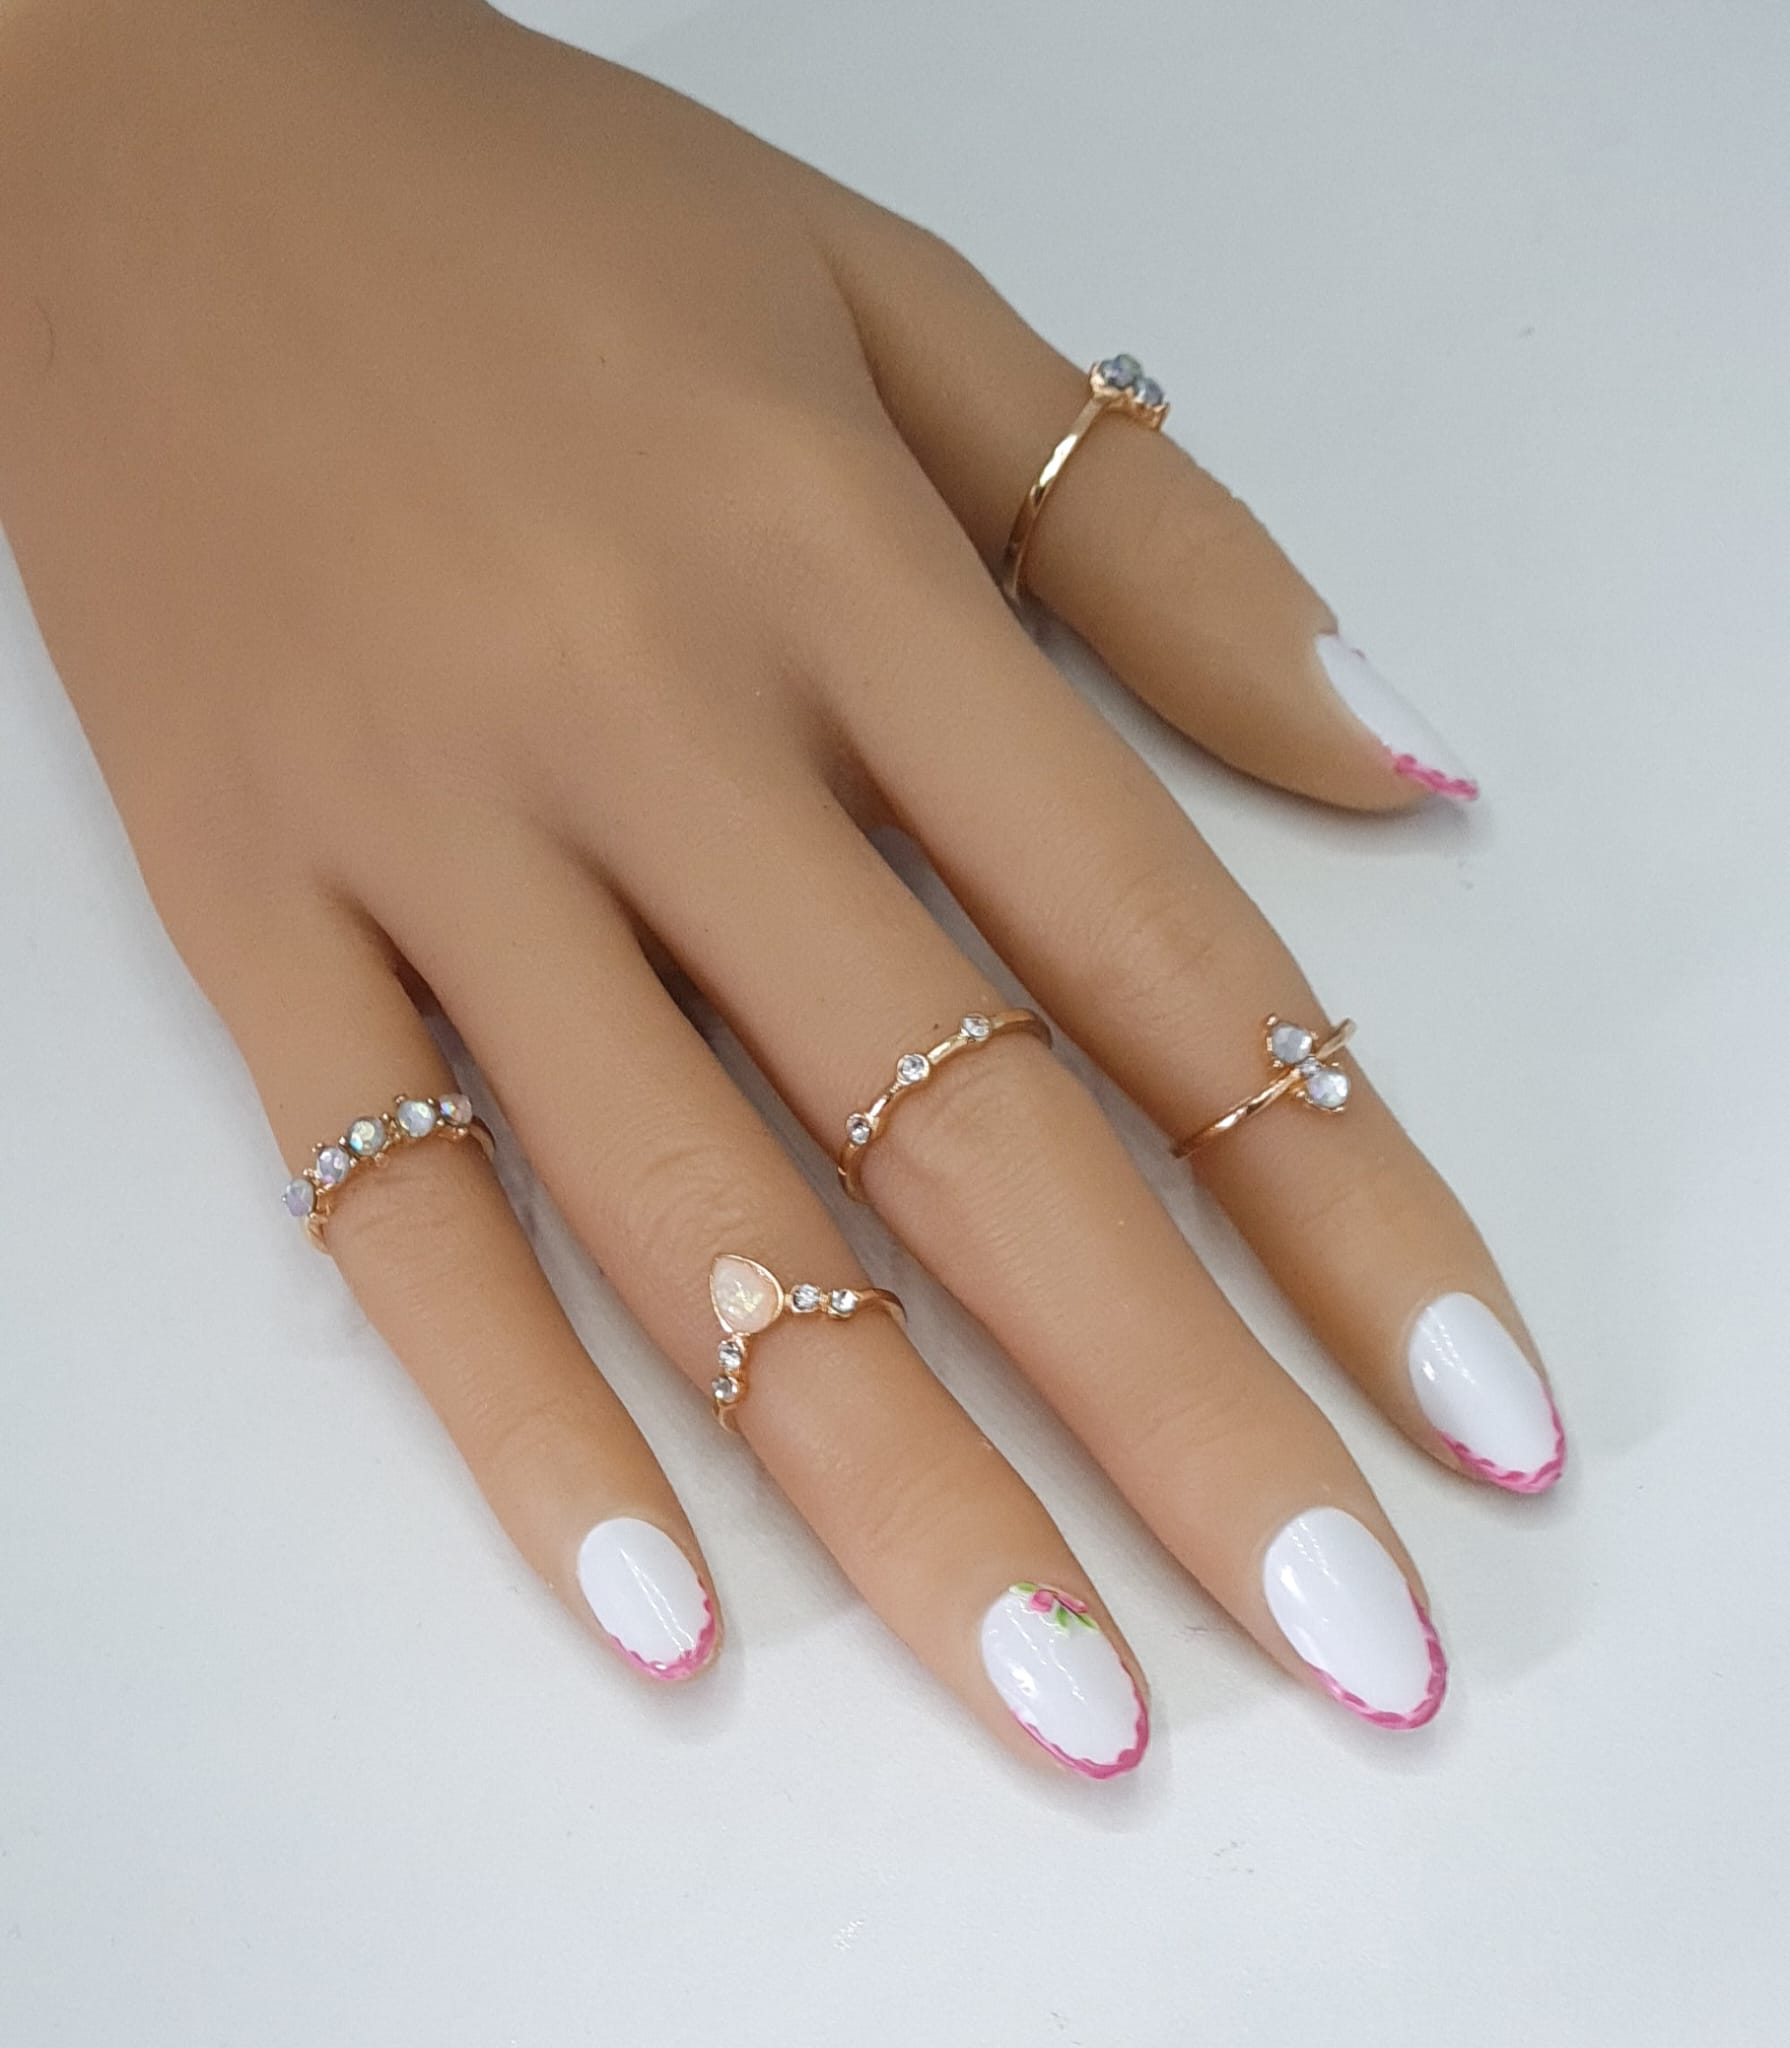 false nails extra short almond nails in a white base colour with pink flower design